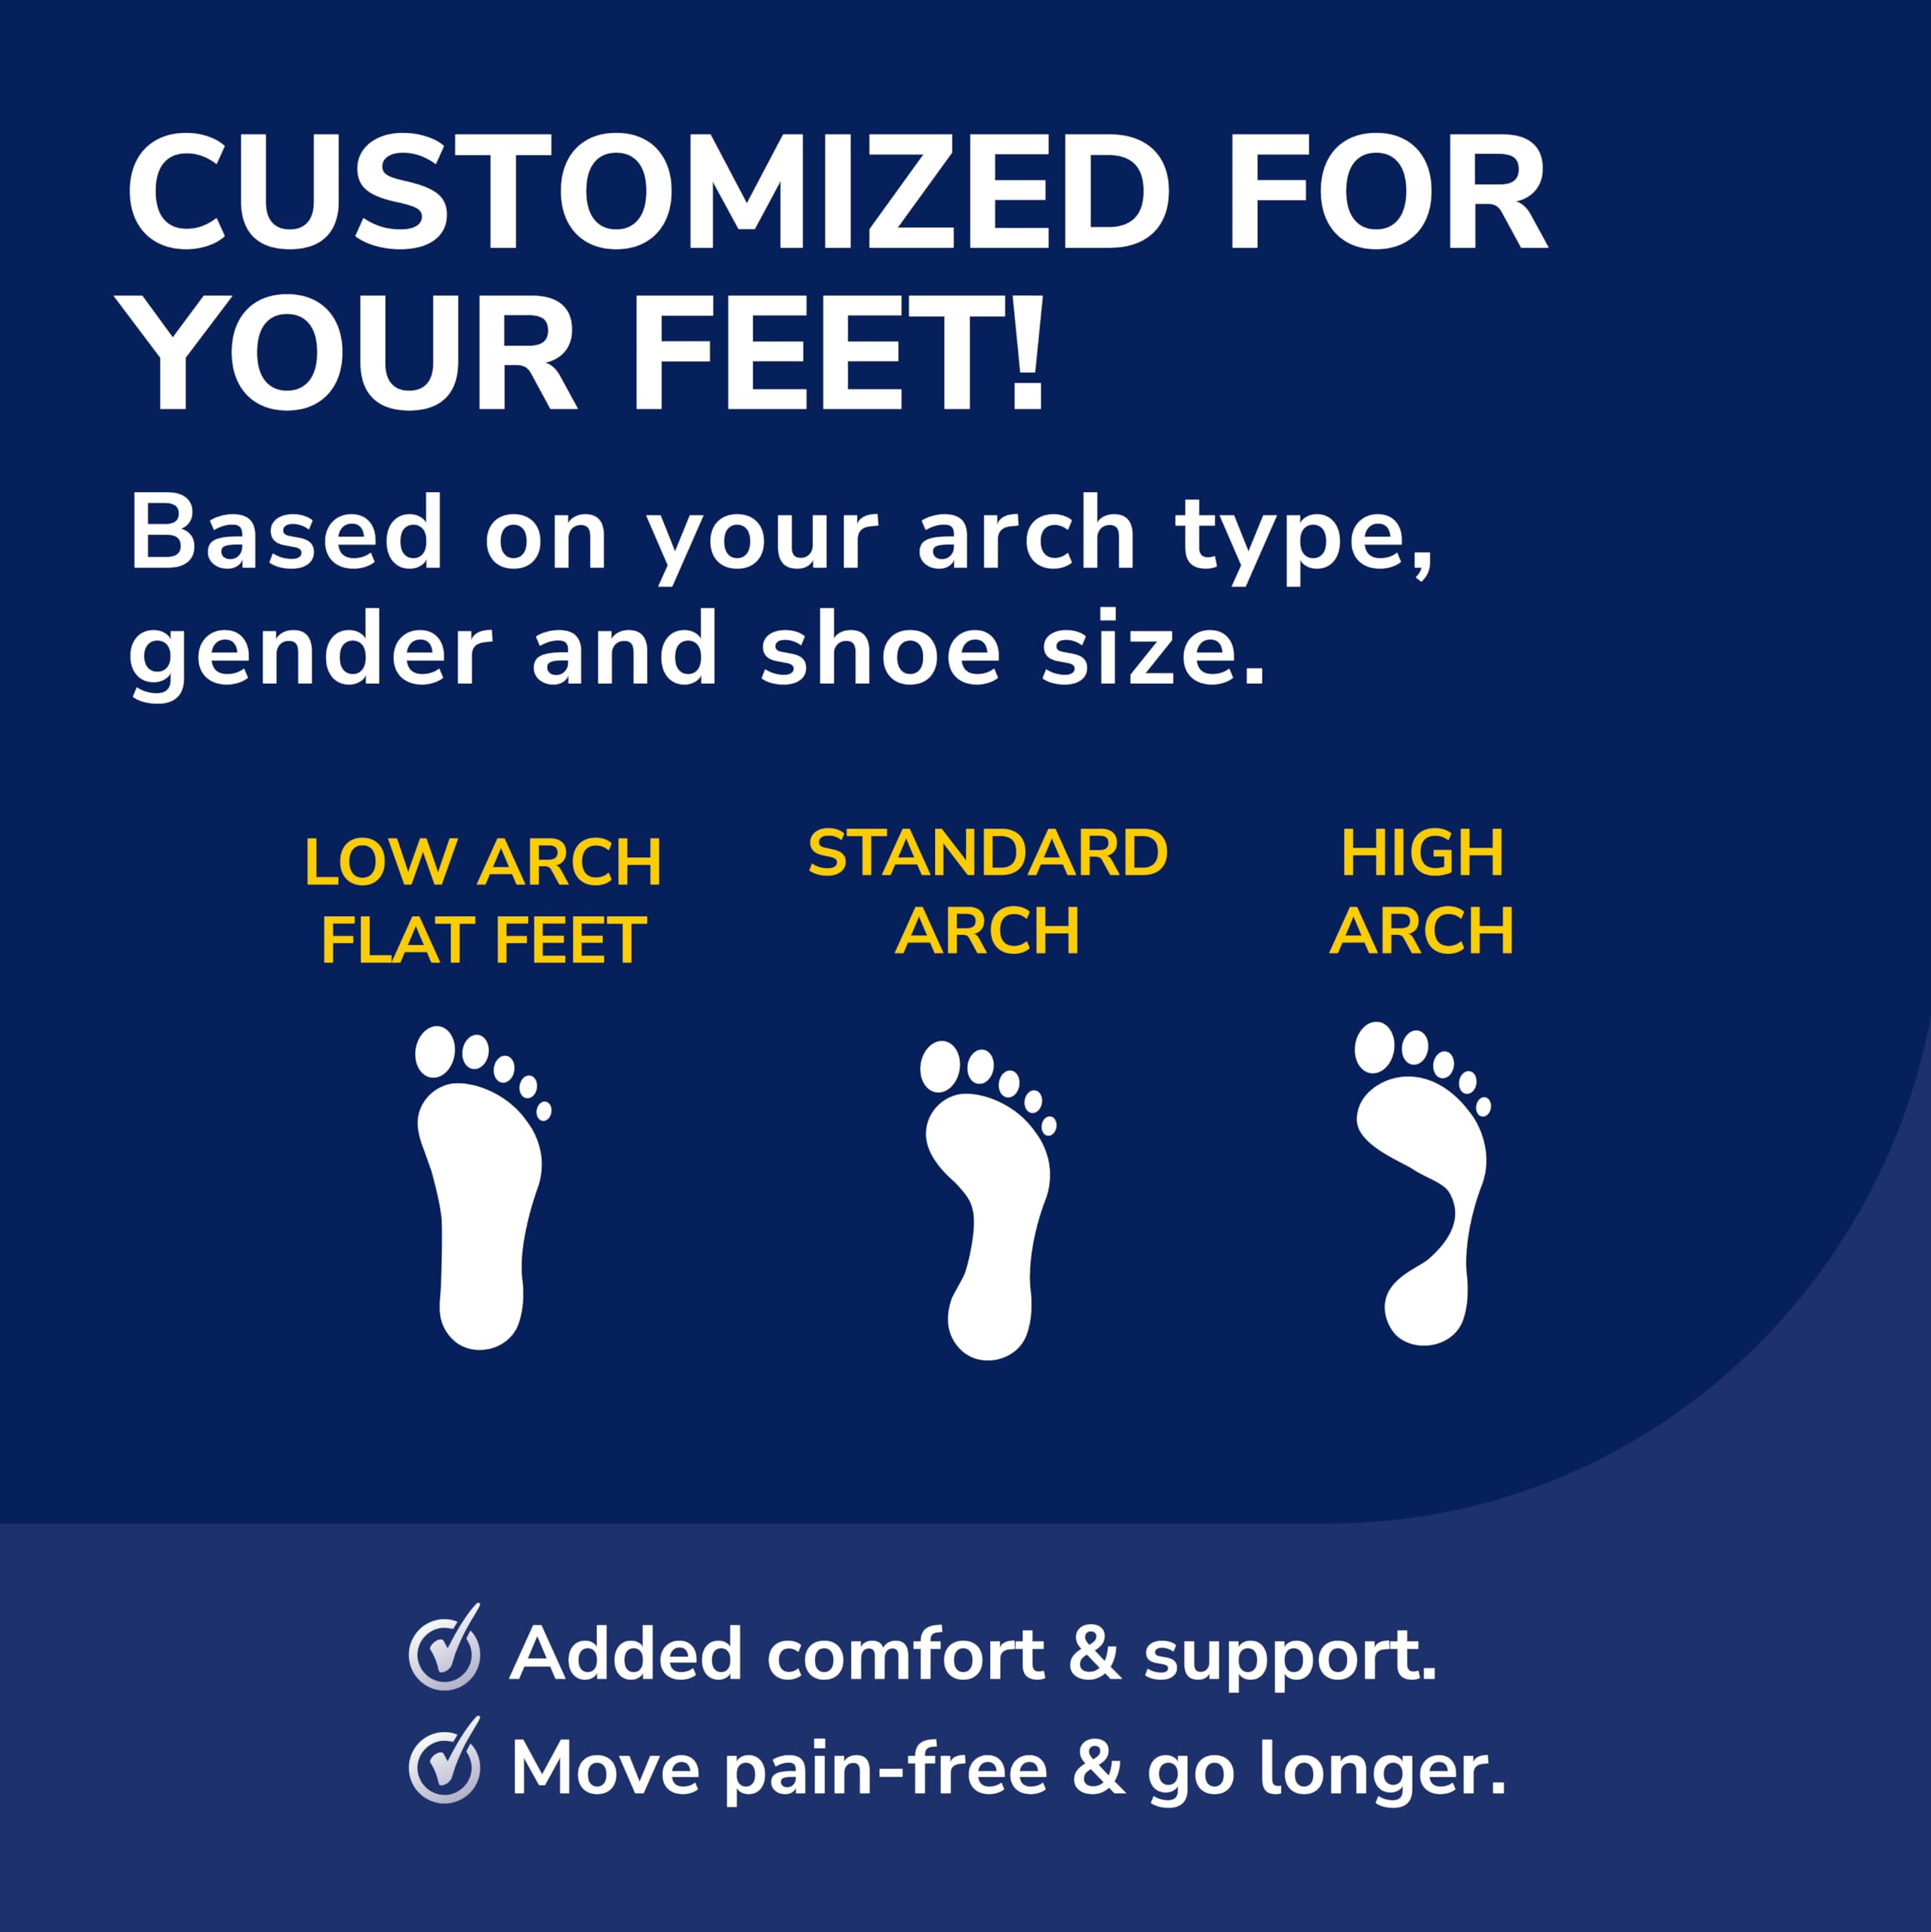 Dr. Scholl’s Custom Fit Orthotics 3/4 Length Inserts, CF 740, Customized for Your Foot & Arch, Immediate All-Day Pain Relief, Lower Back, Knee, Plantar Fascia, Heel, Insoles Fit Men & Womens Shoes